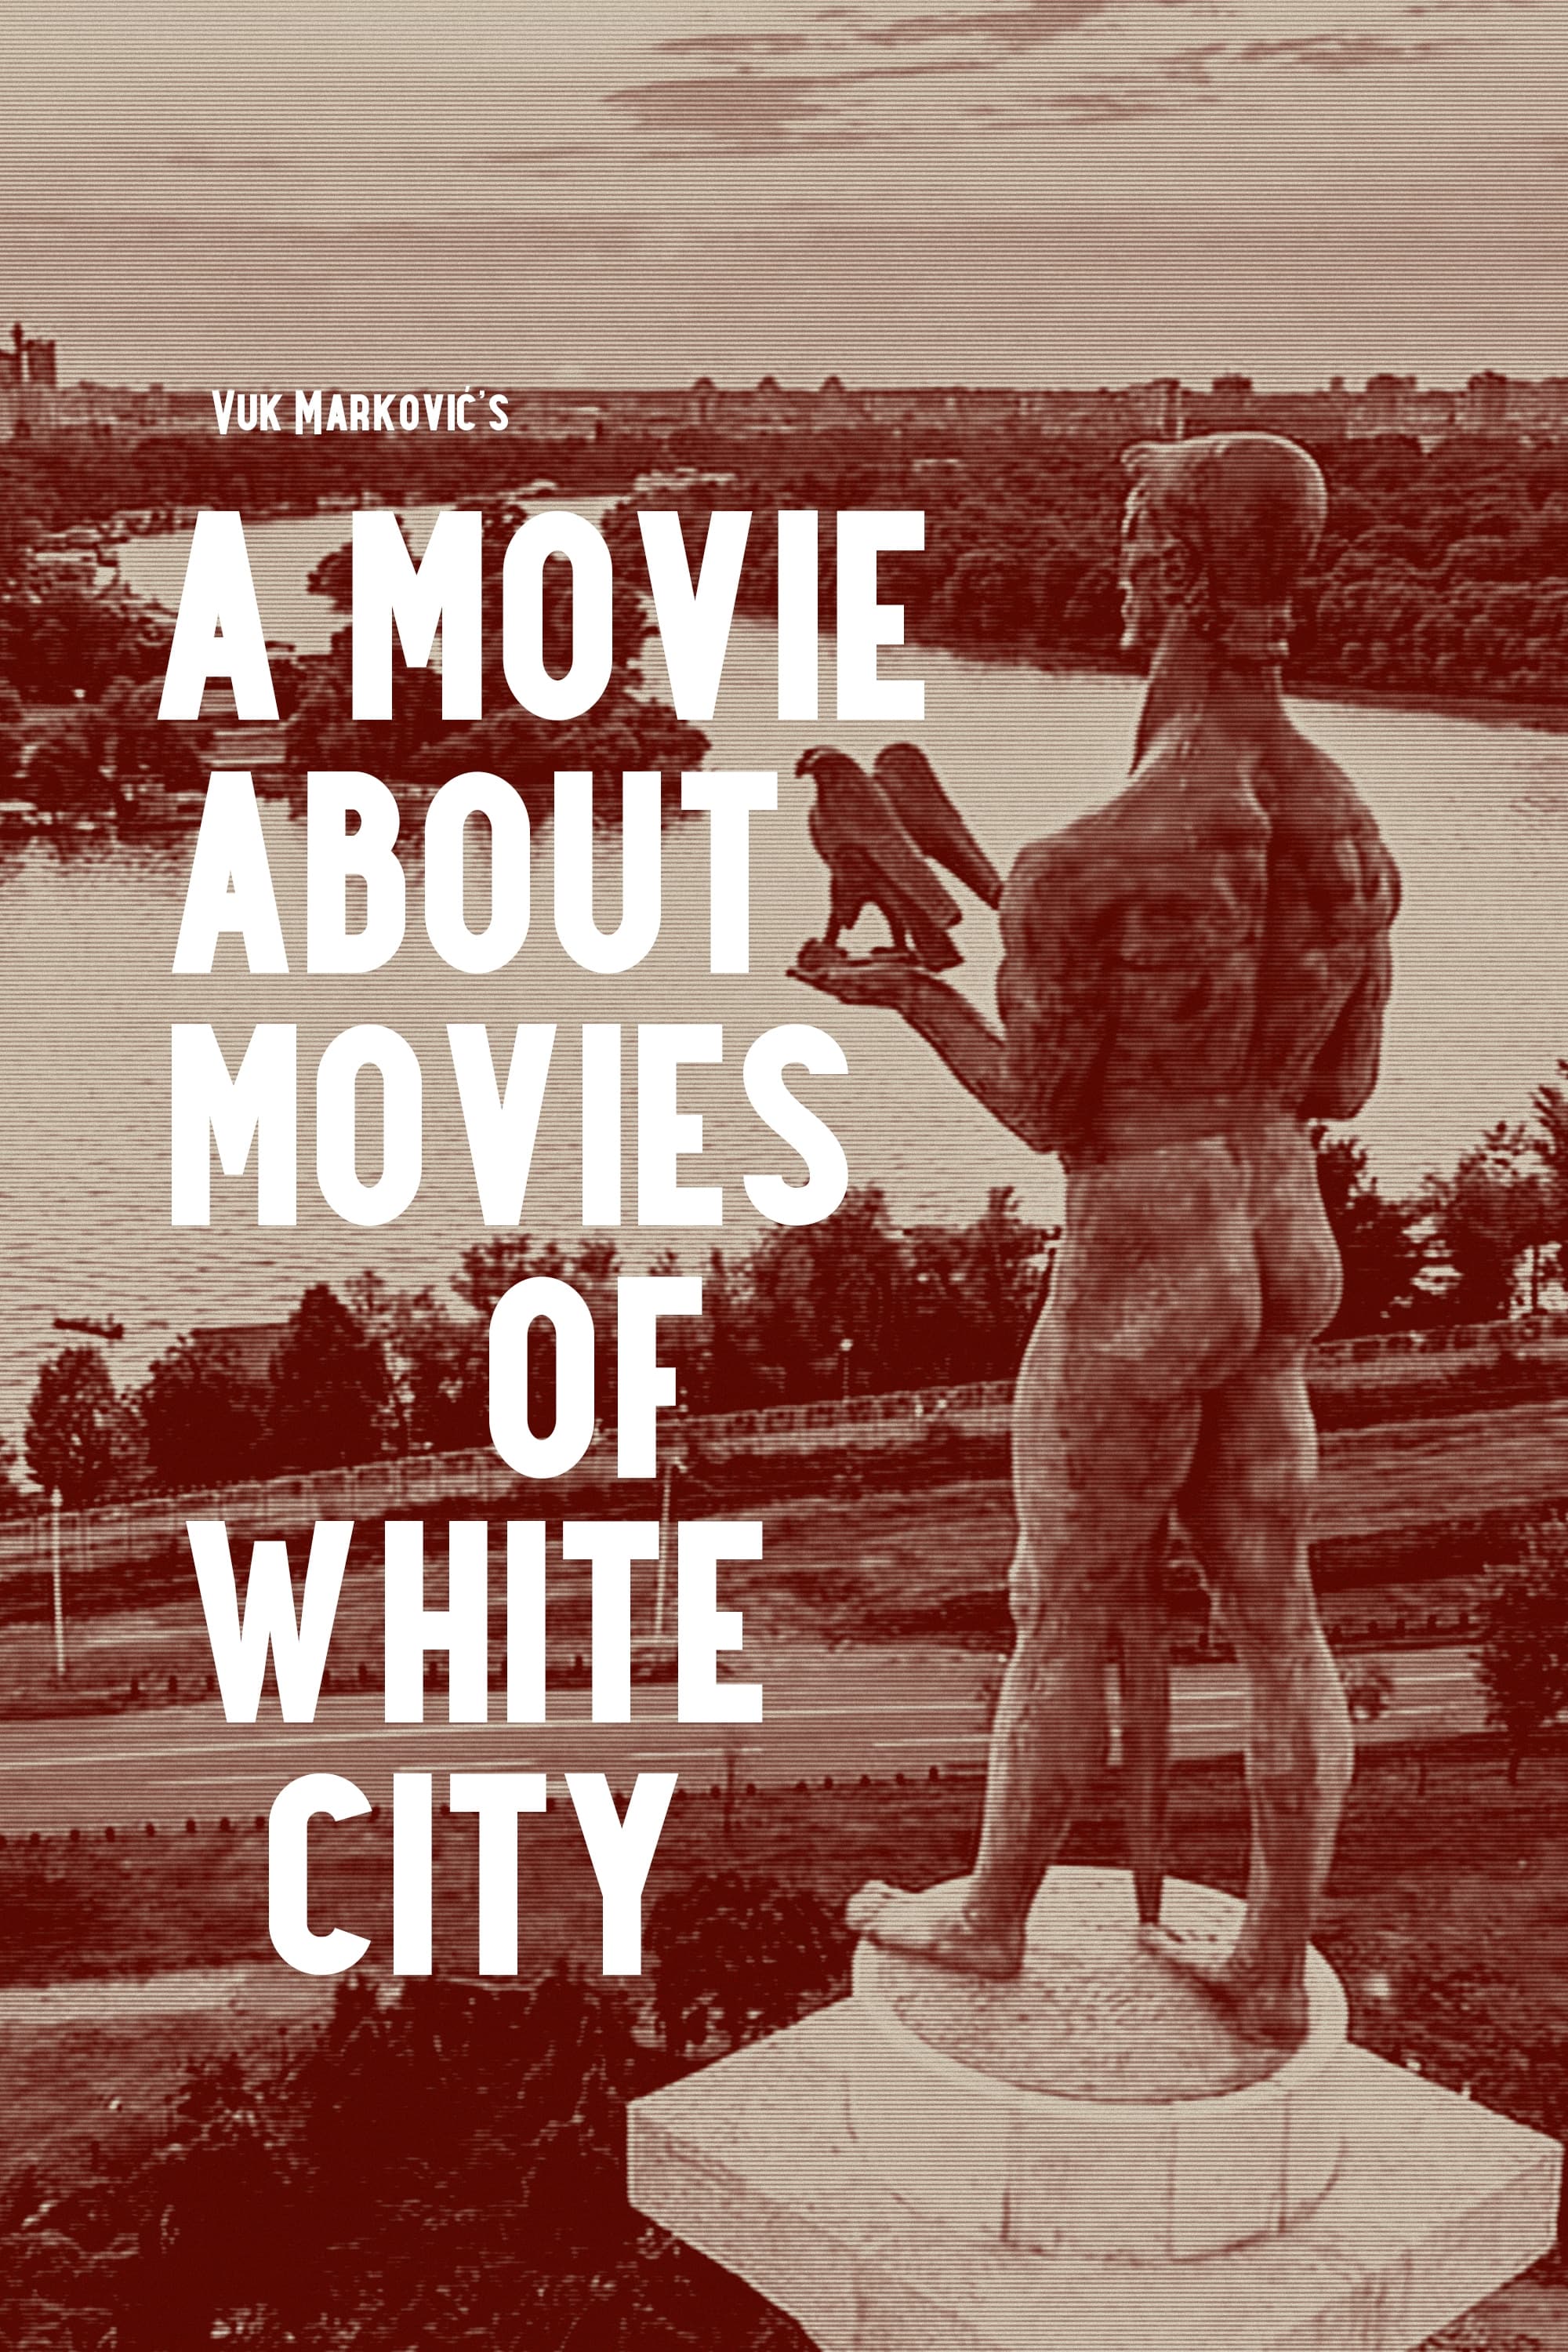 A Movie about Movies of White City